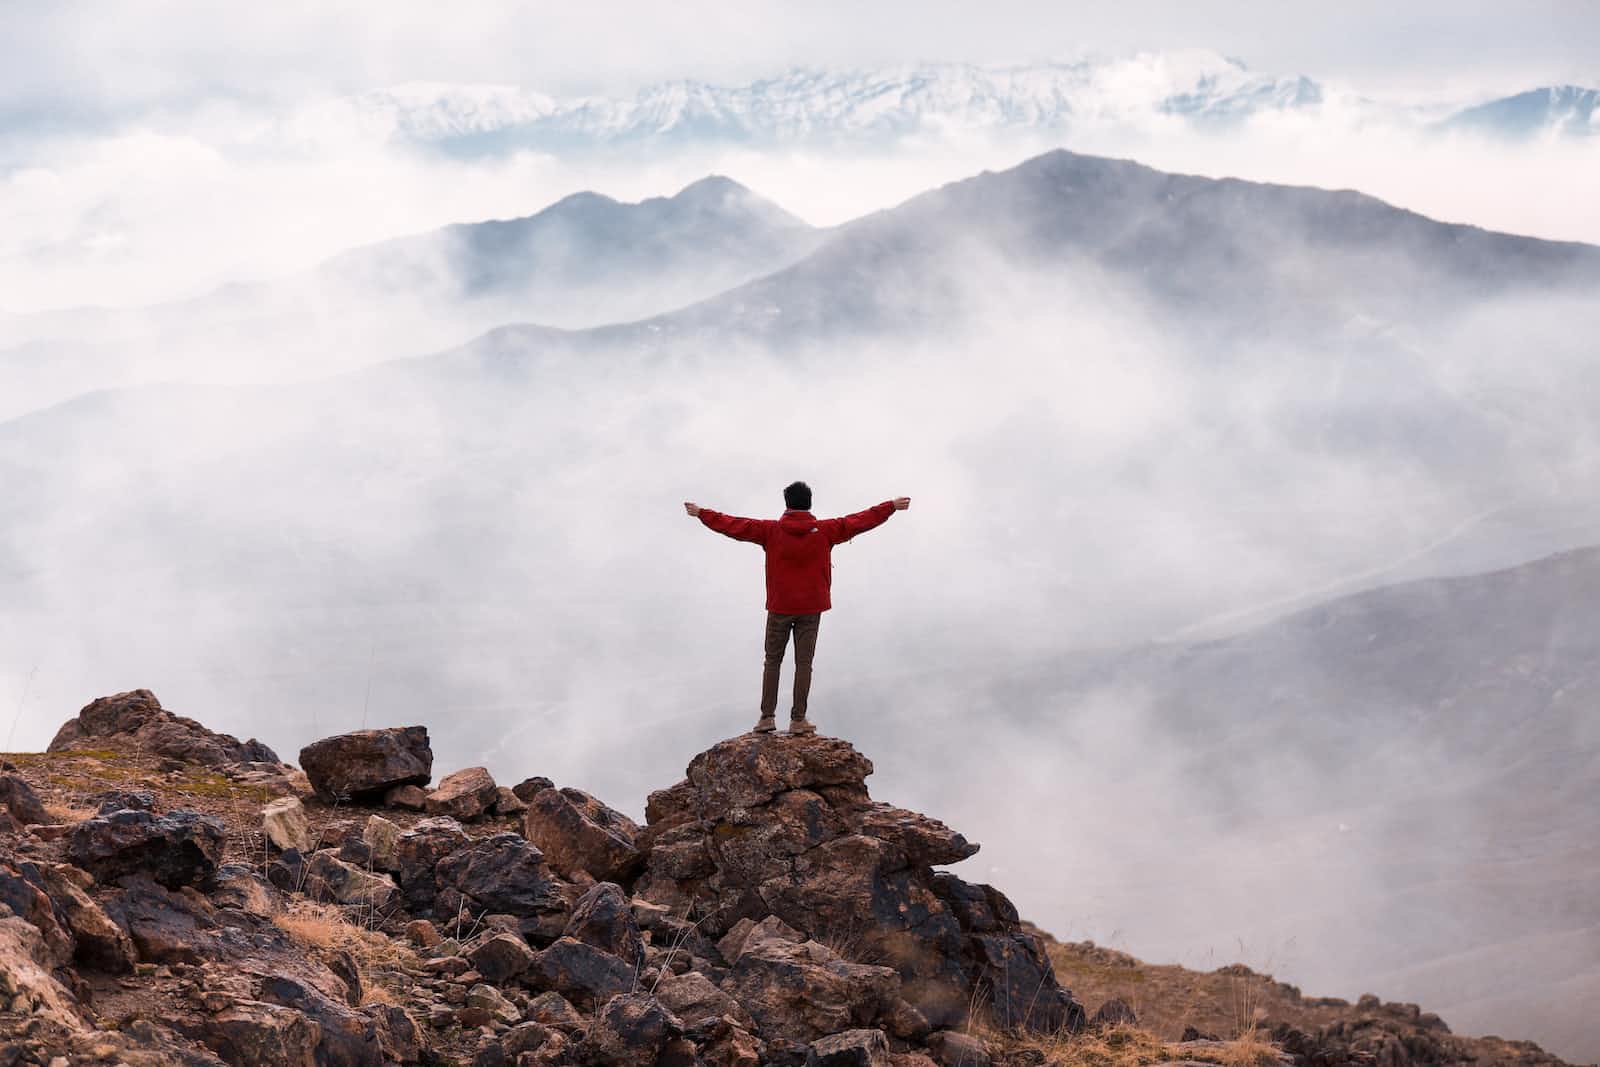 Jubilant and successful person with arms outstretched above a misty mountain range